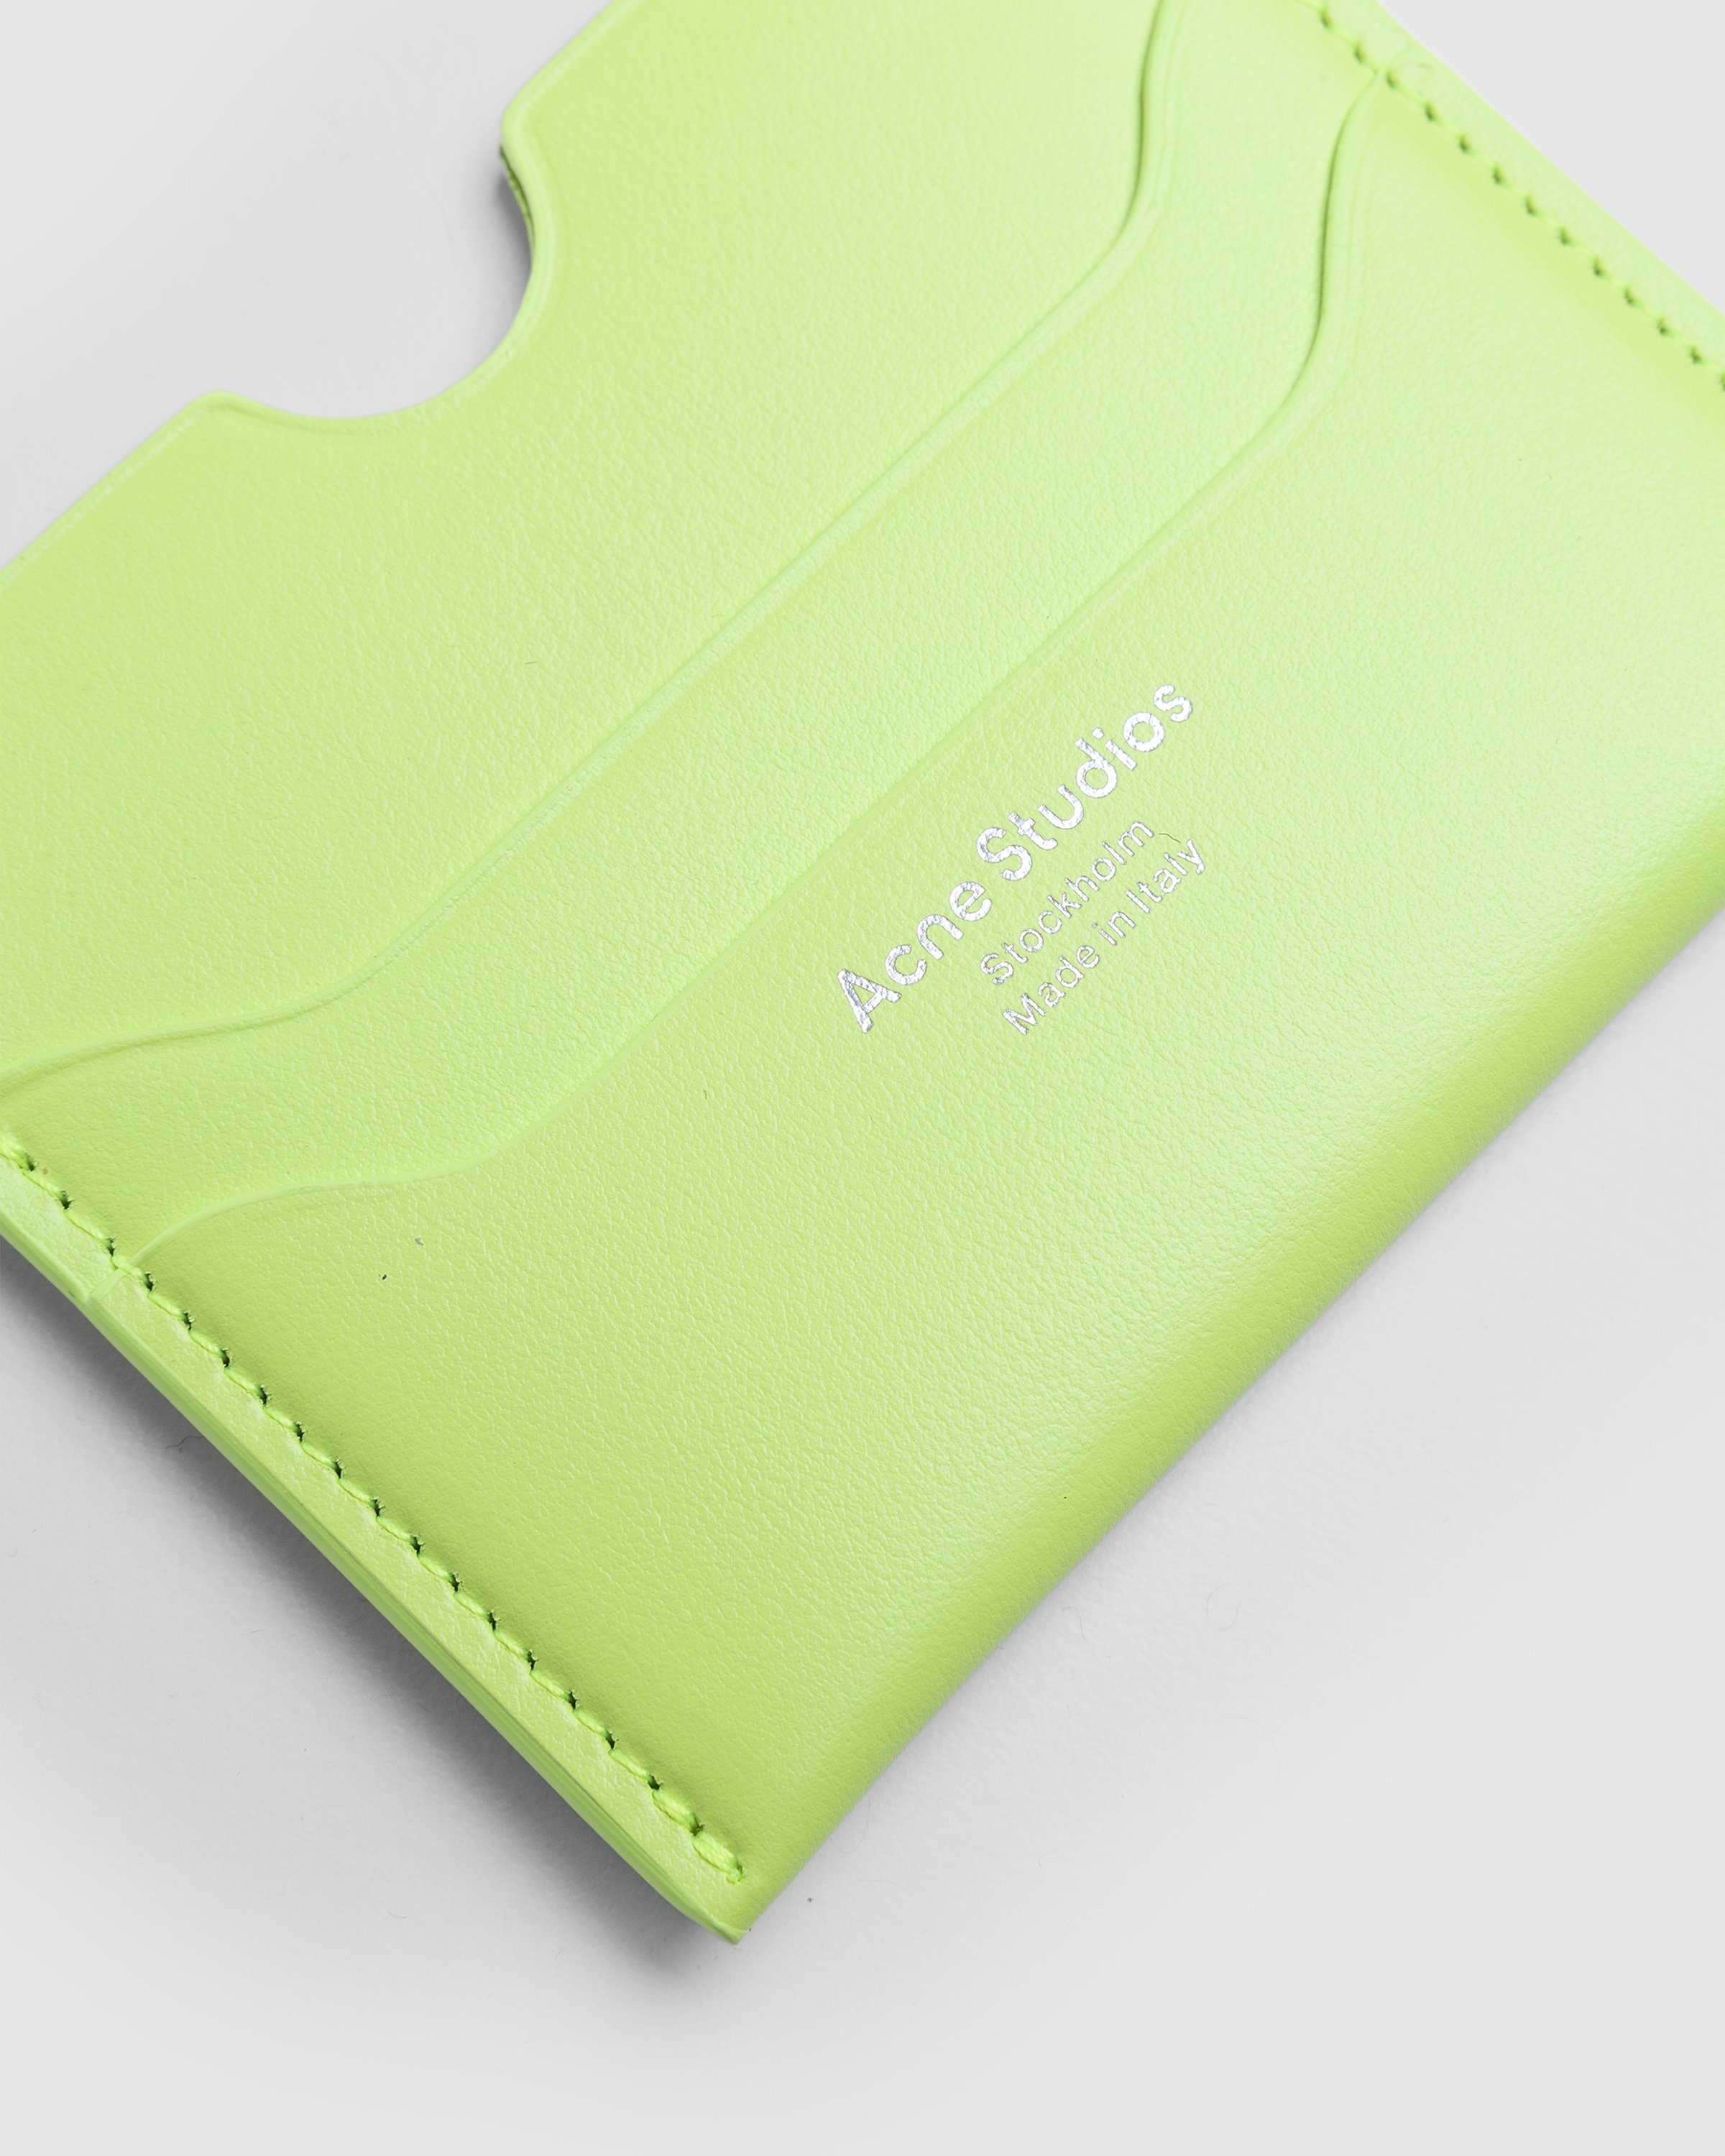 Acne Studios – Leather Card Holder Lime Green - Wallets - Green - Image 3